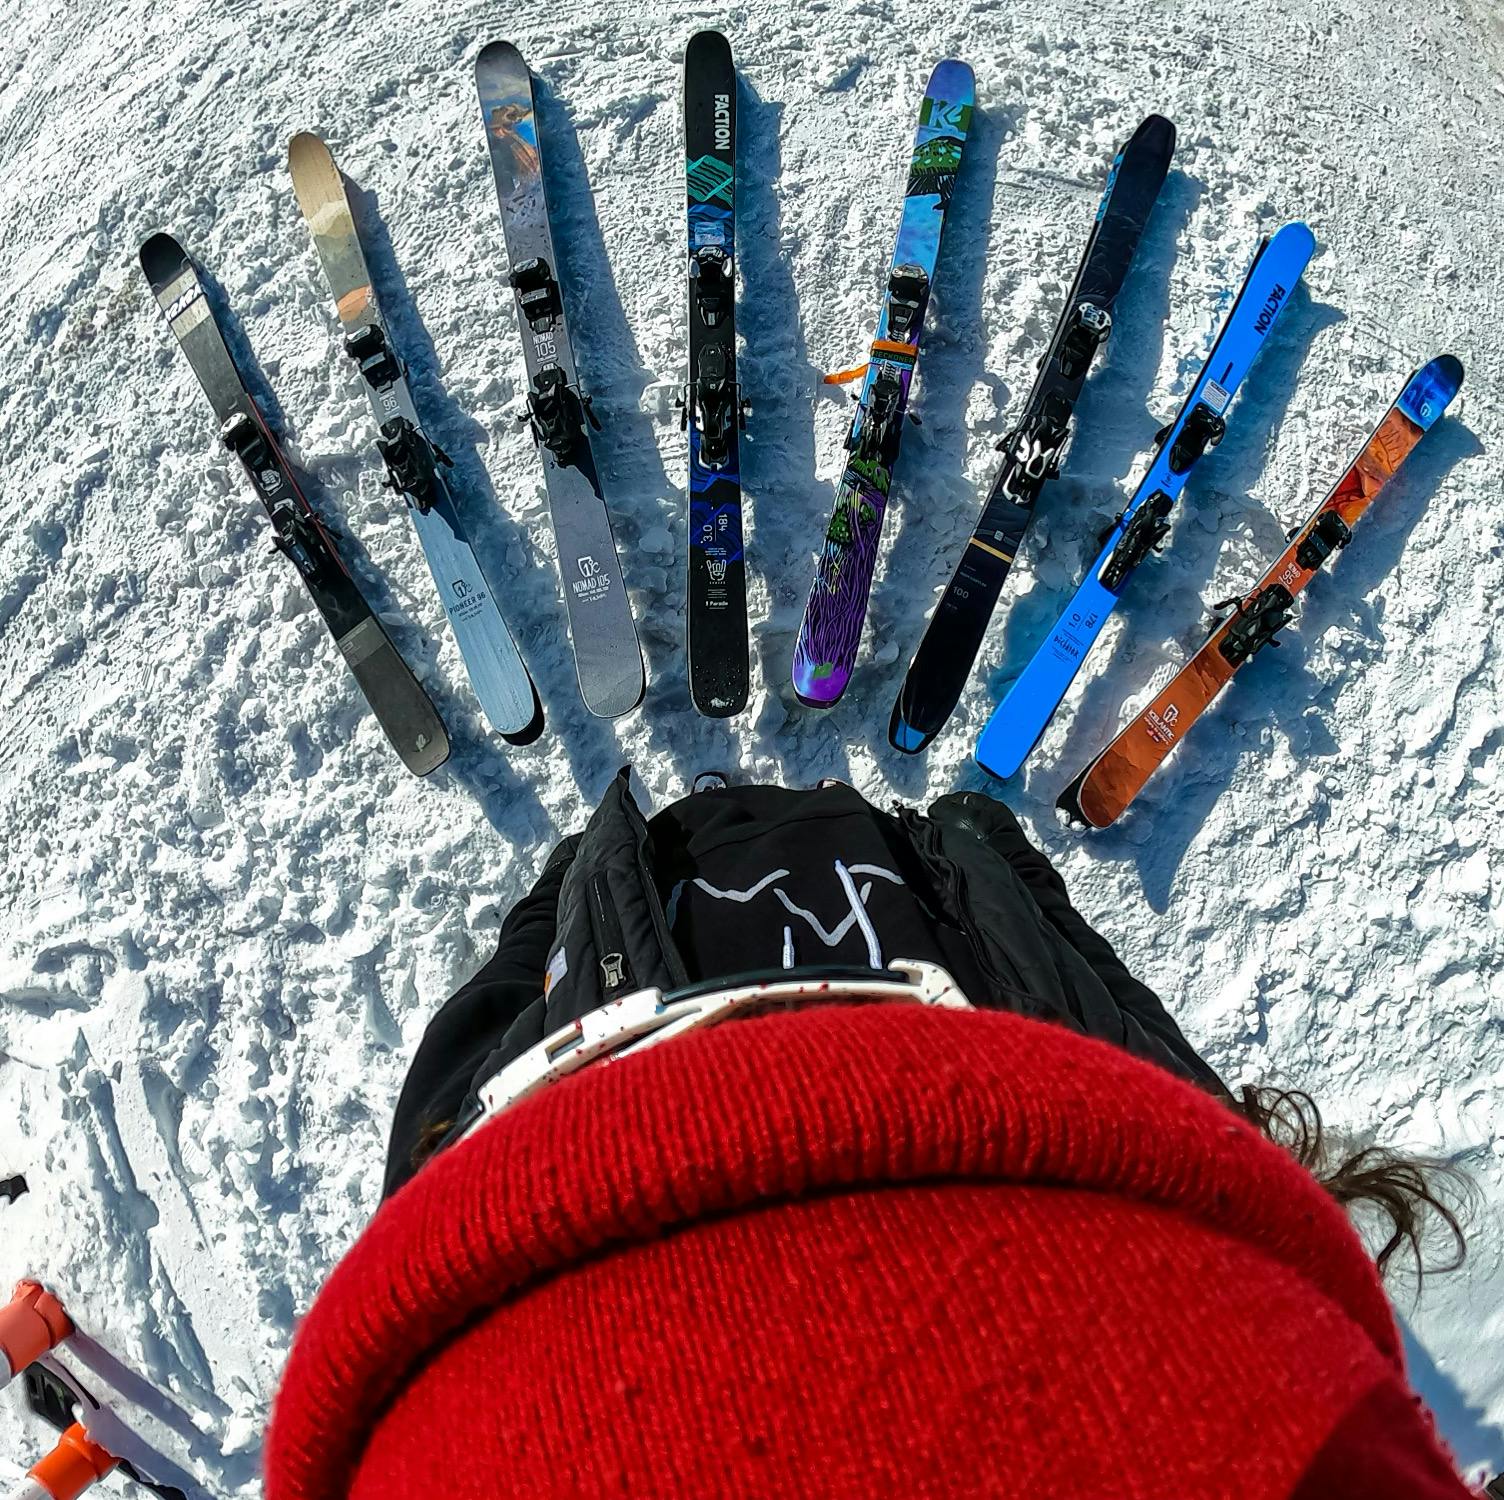 Top down view of several pairs of skis. 